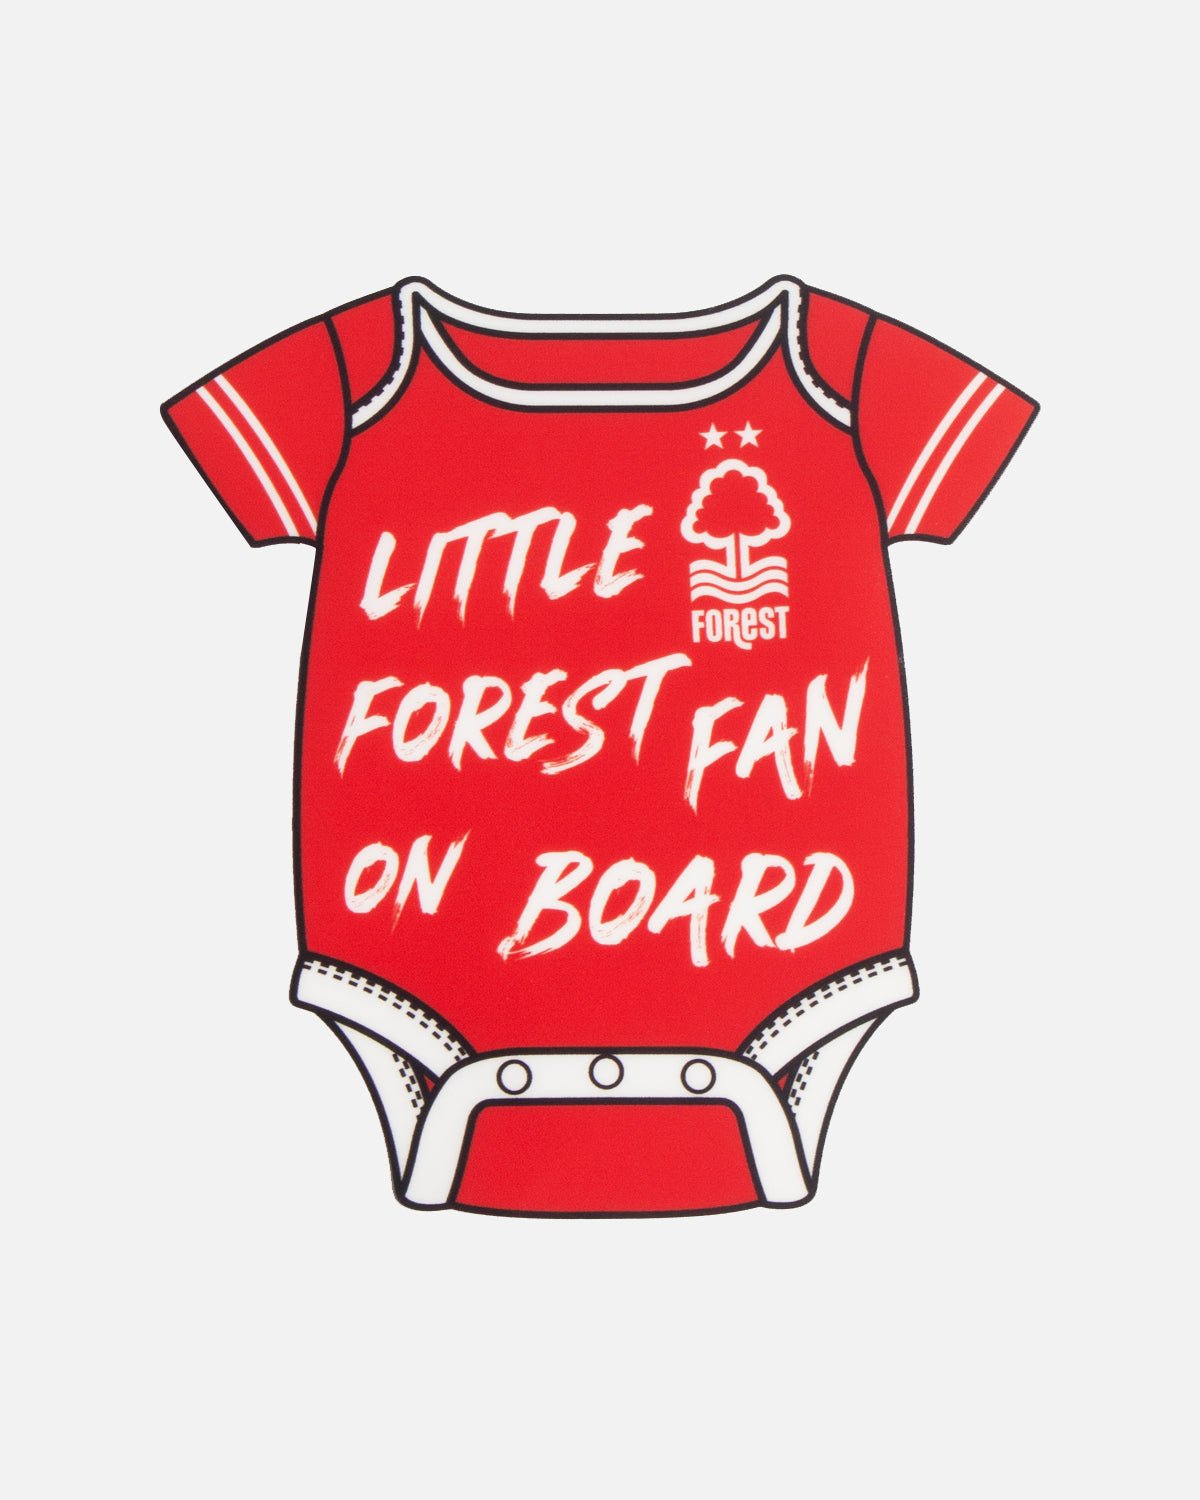 NFFC Baby on Board Car Sticker - Nottingham Forest FC